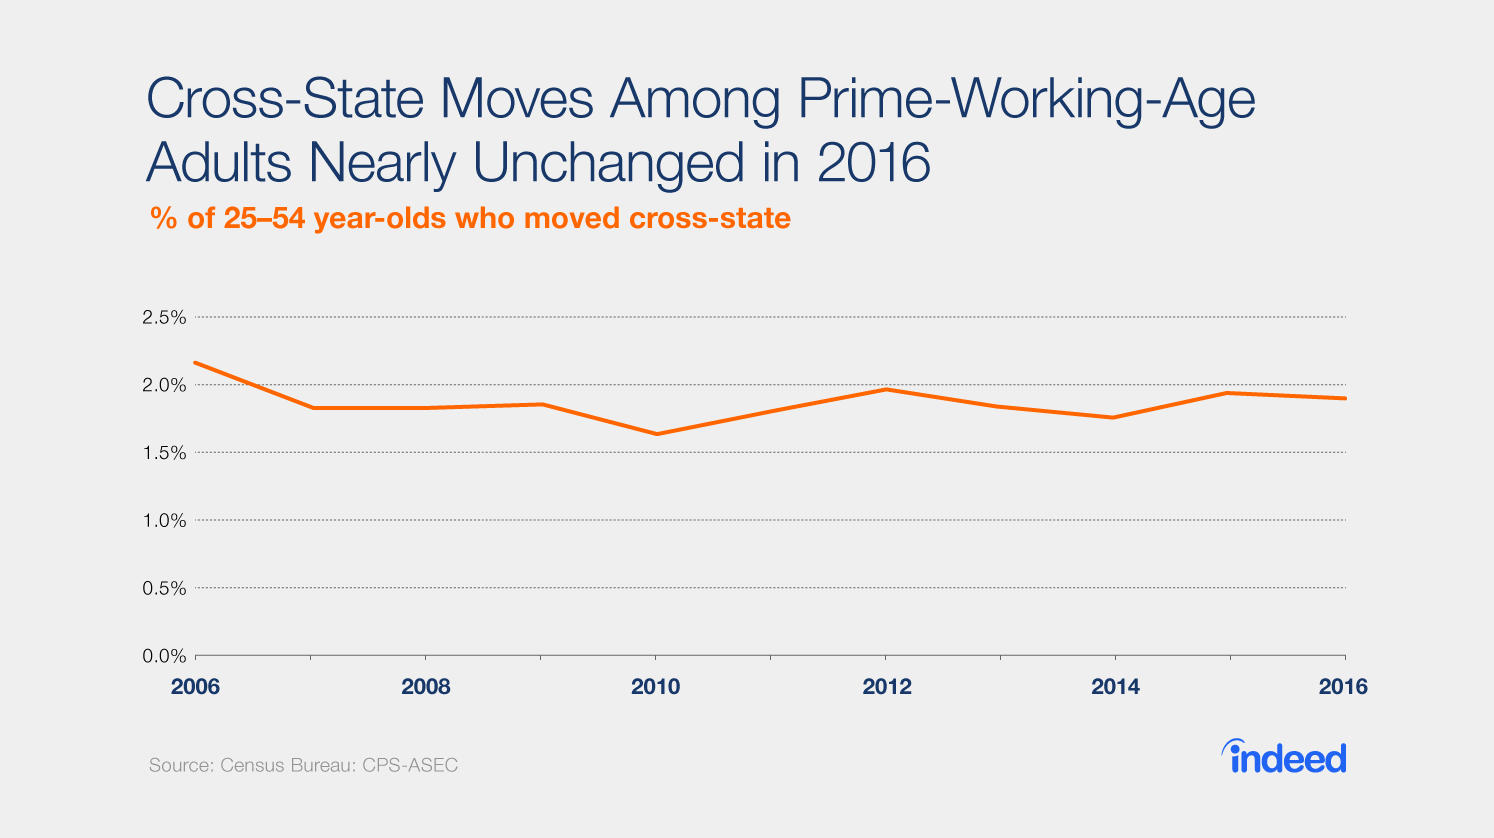 Cross-State Moves Among Prime-Working-Age Adults Nearly Unchanged in 2016